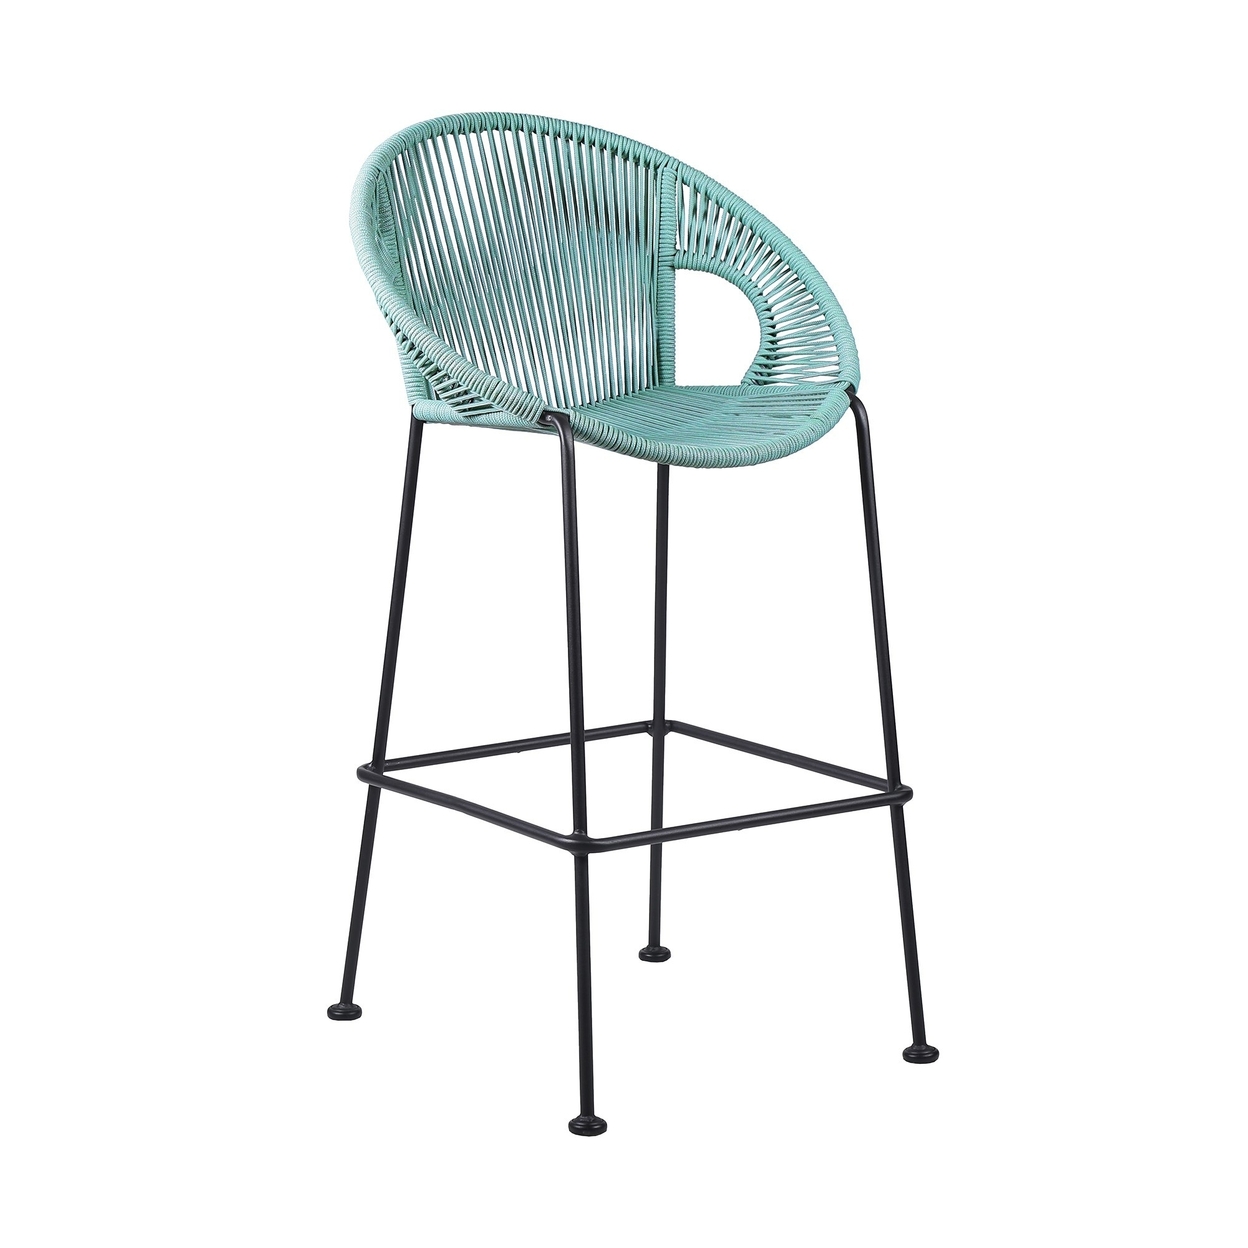 30 Inch Indoor Outdoor Bar Stool With Rounded Rope Woven Seat, Blue- Saltoro Sherpi